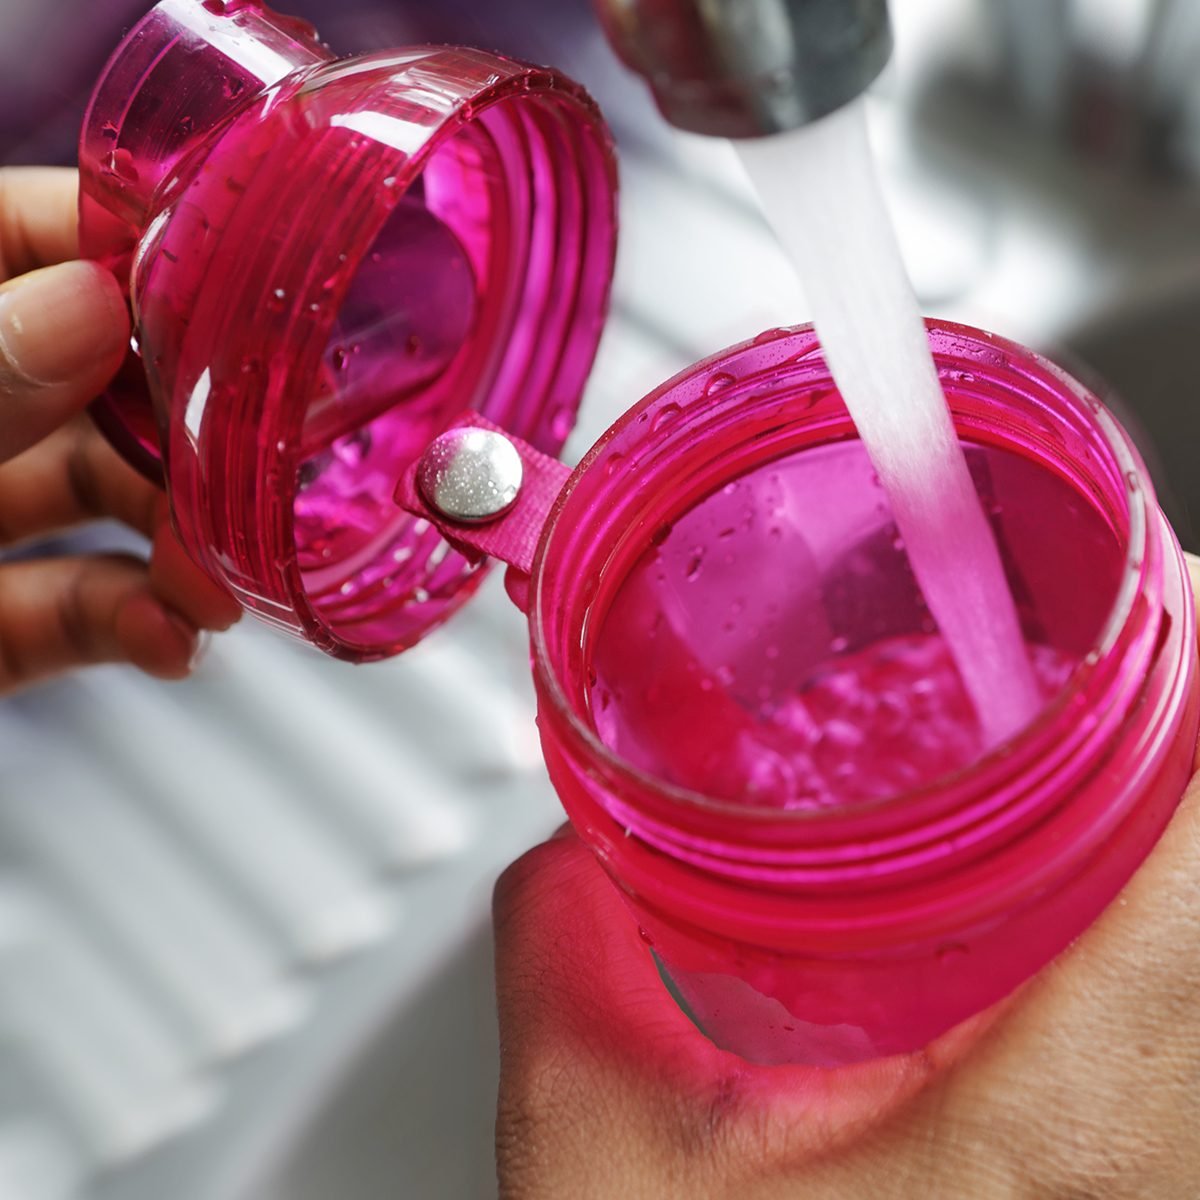 How to clean a reusable water bottle